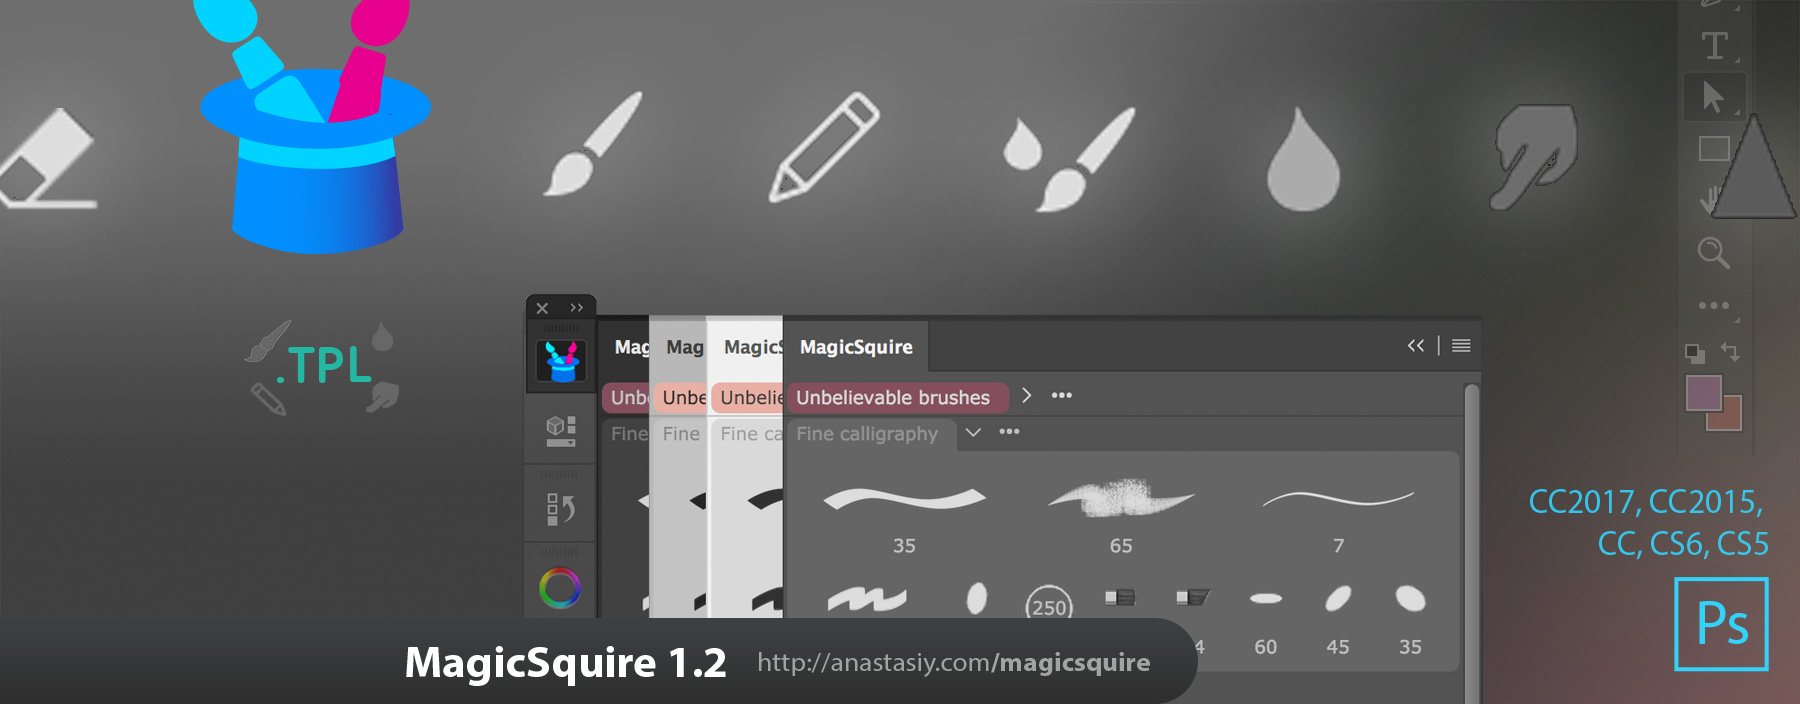 MagicSquire 1.2 supports Tool Presets and .TP:L files